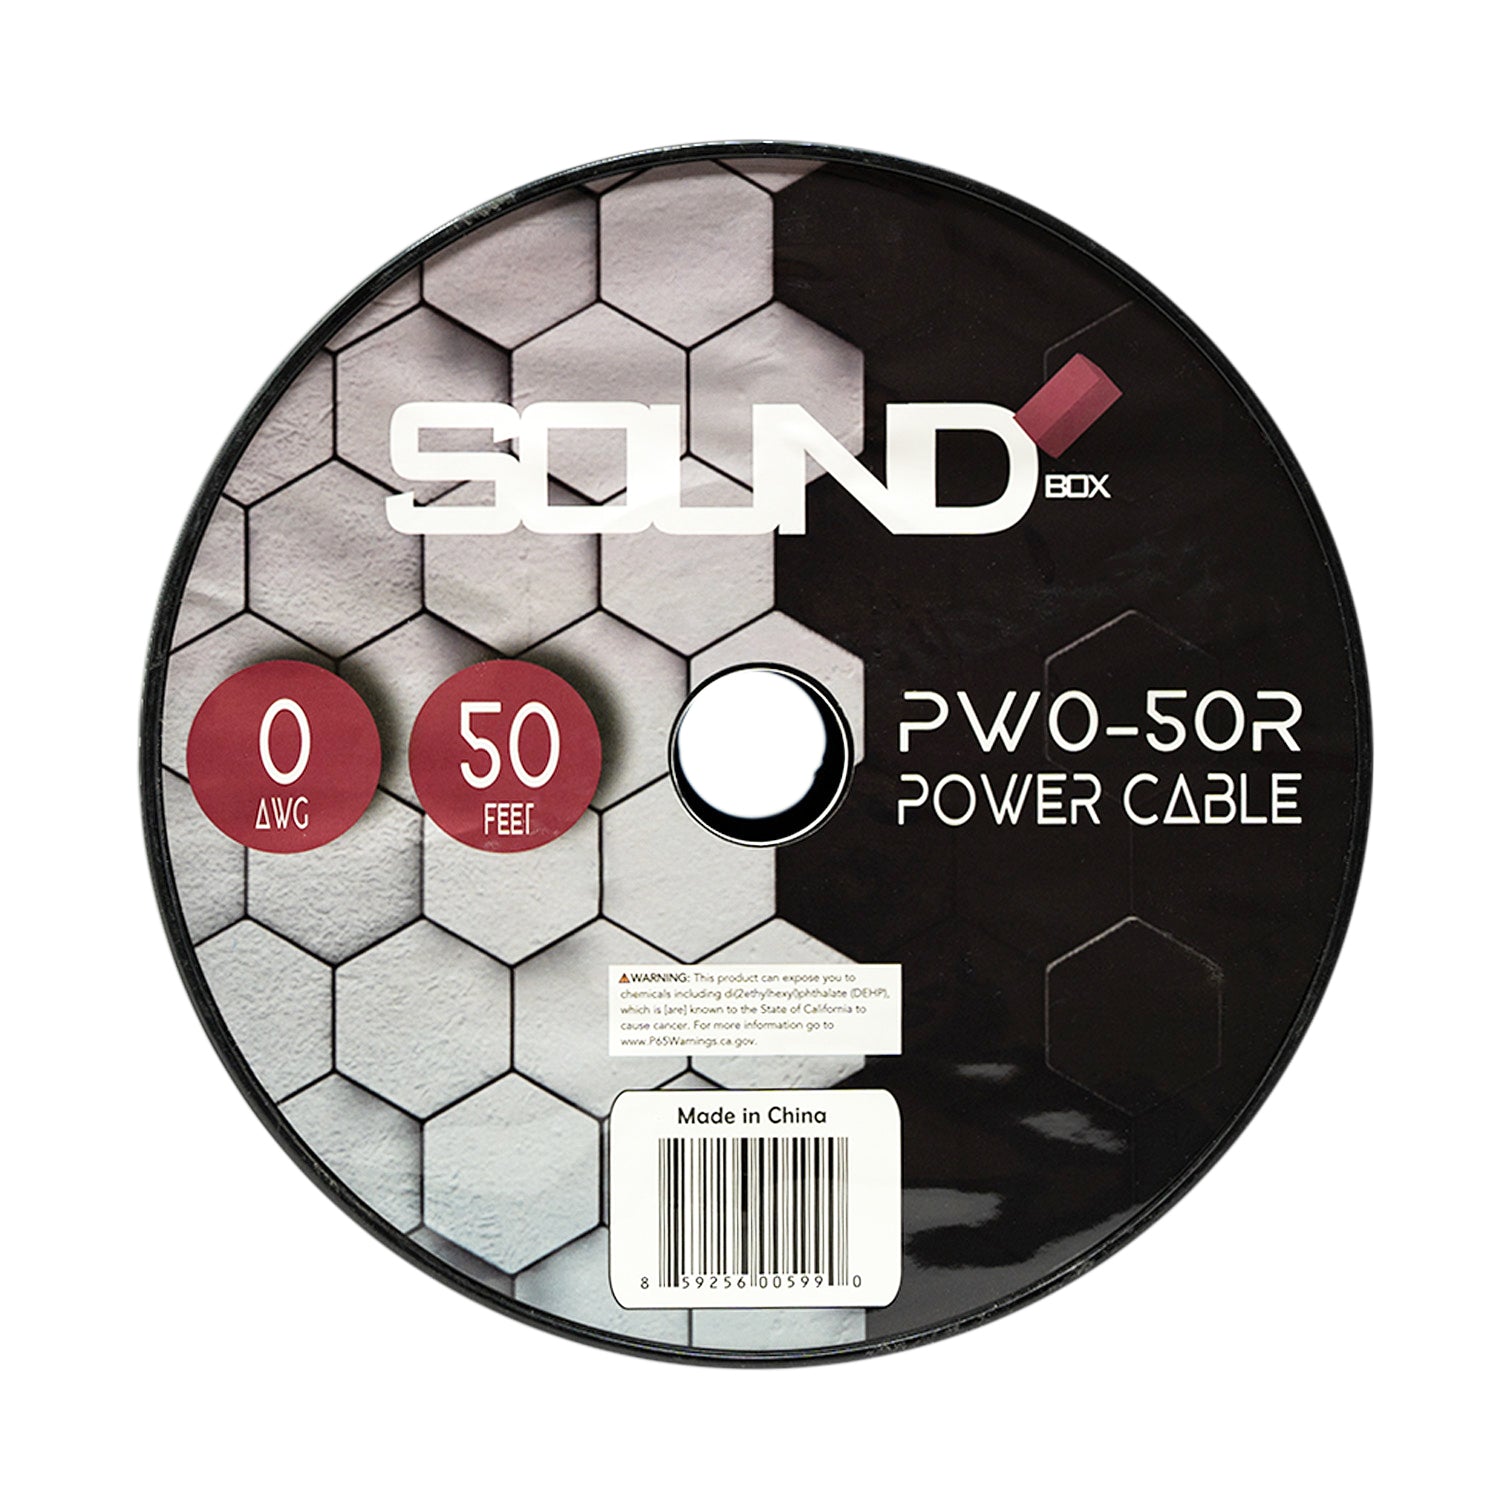 SoundBox PW0-50R, 0 Gauge 50 Ft. OFC Copper Amplifier Power / Ground Wire Spool, Red